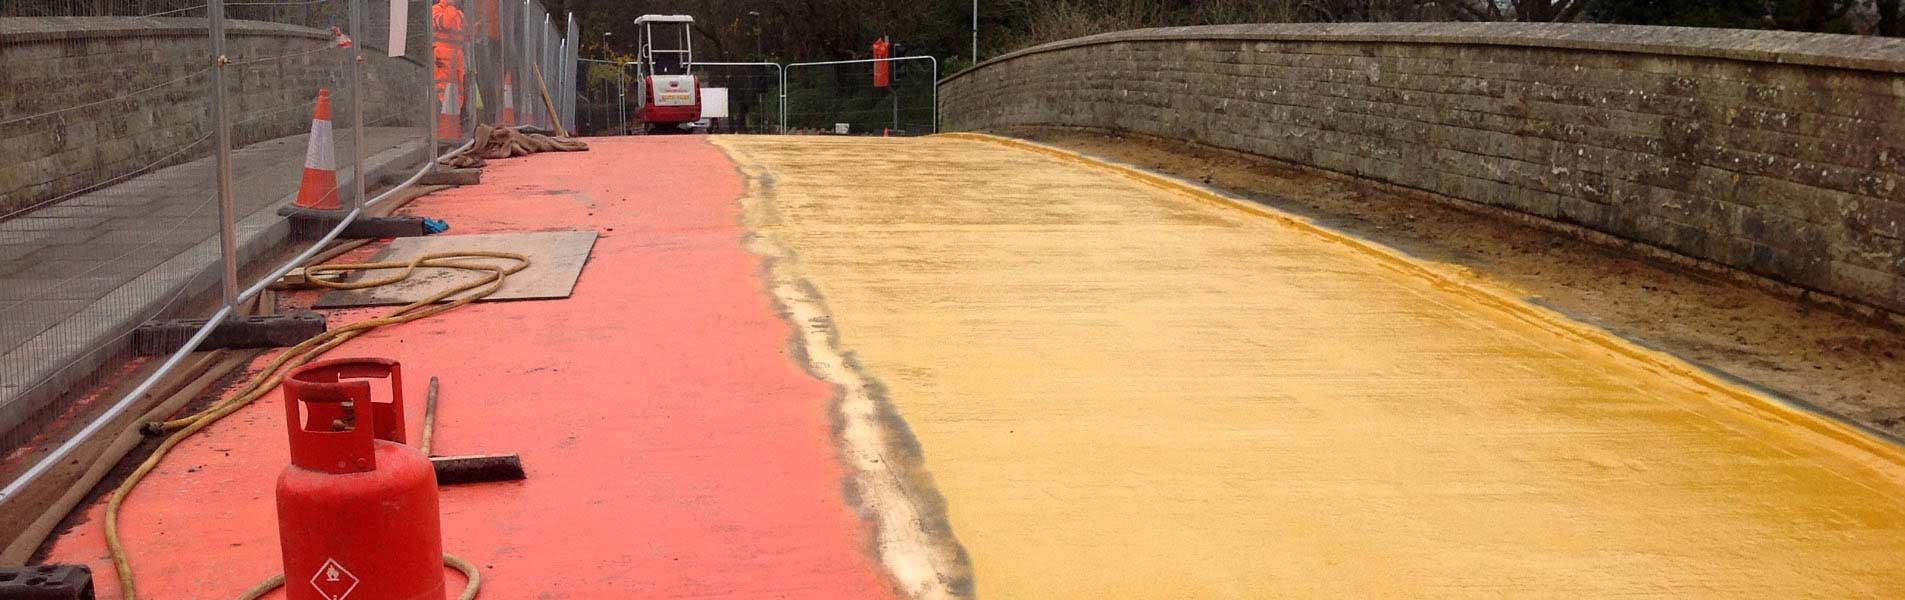 image of Culliford Bridge during re-waterproofing in Dorchester